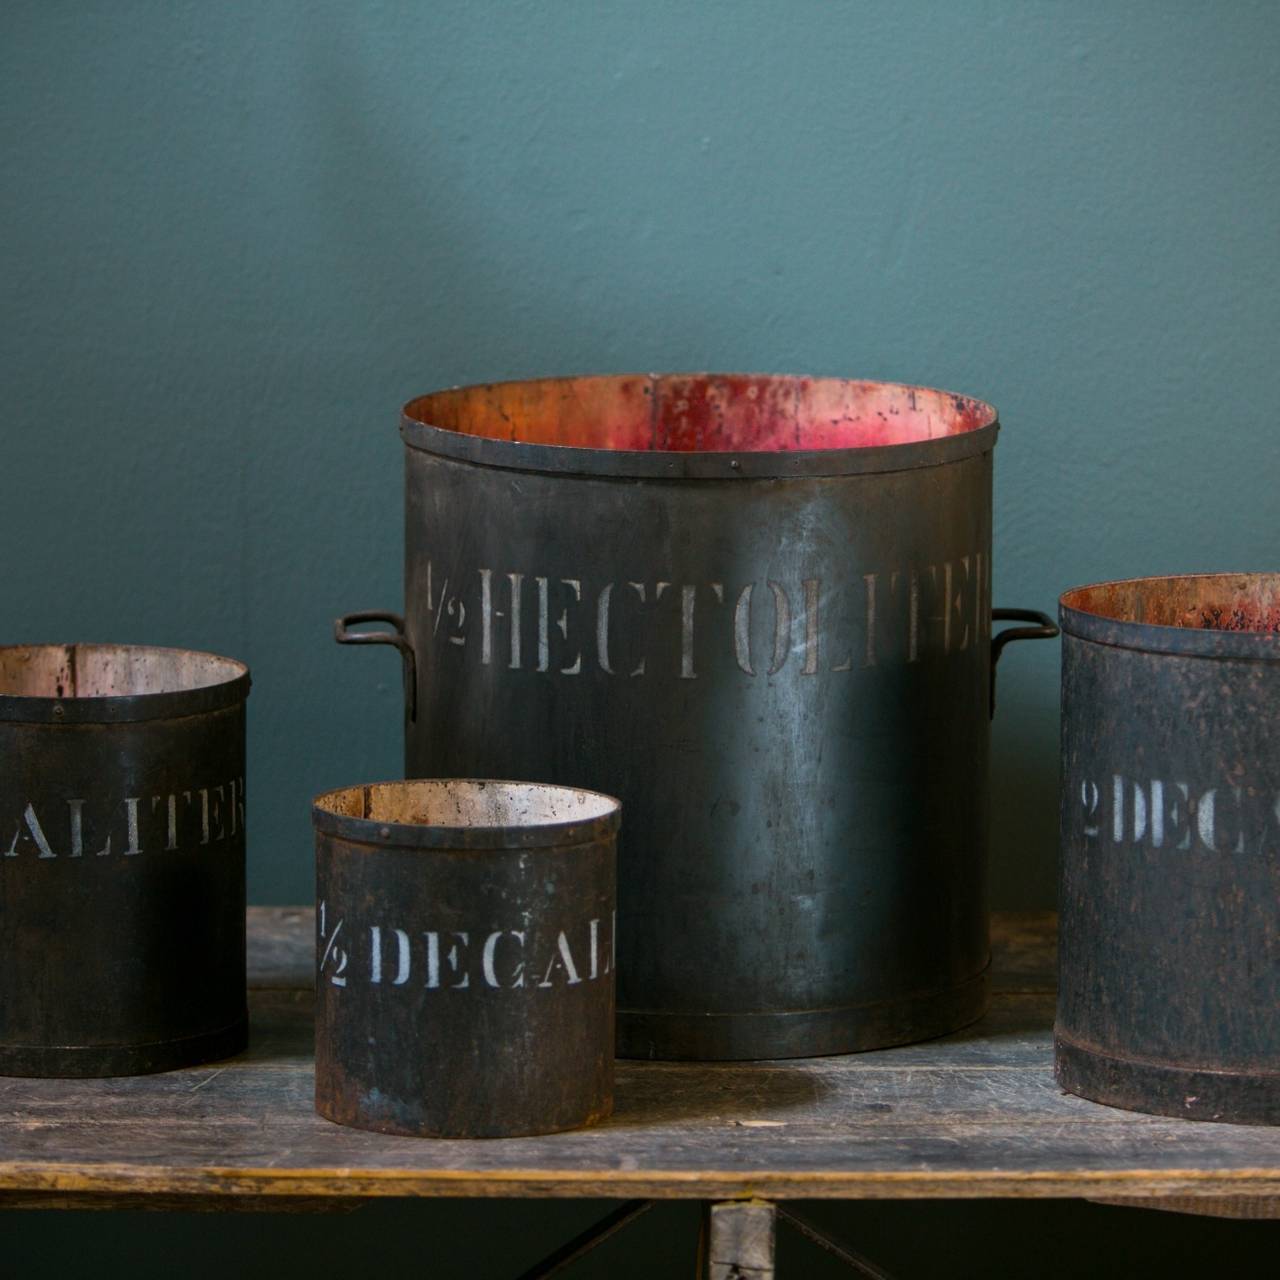 Set of for iron measures. Hand-painted with hand-stenciled lettering. Likely use in a Belgian factory. The largest measure of the set has handles. Measures measure 16, 12, 9 and 7.5 inches in diameter.